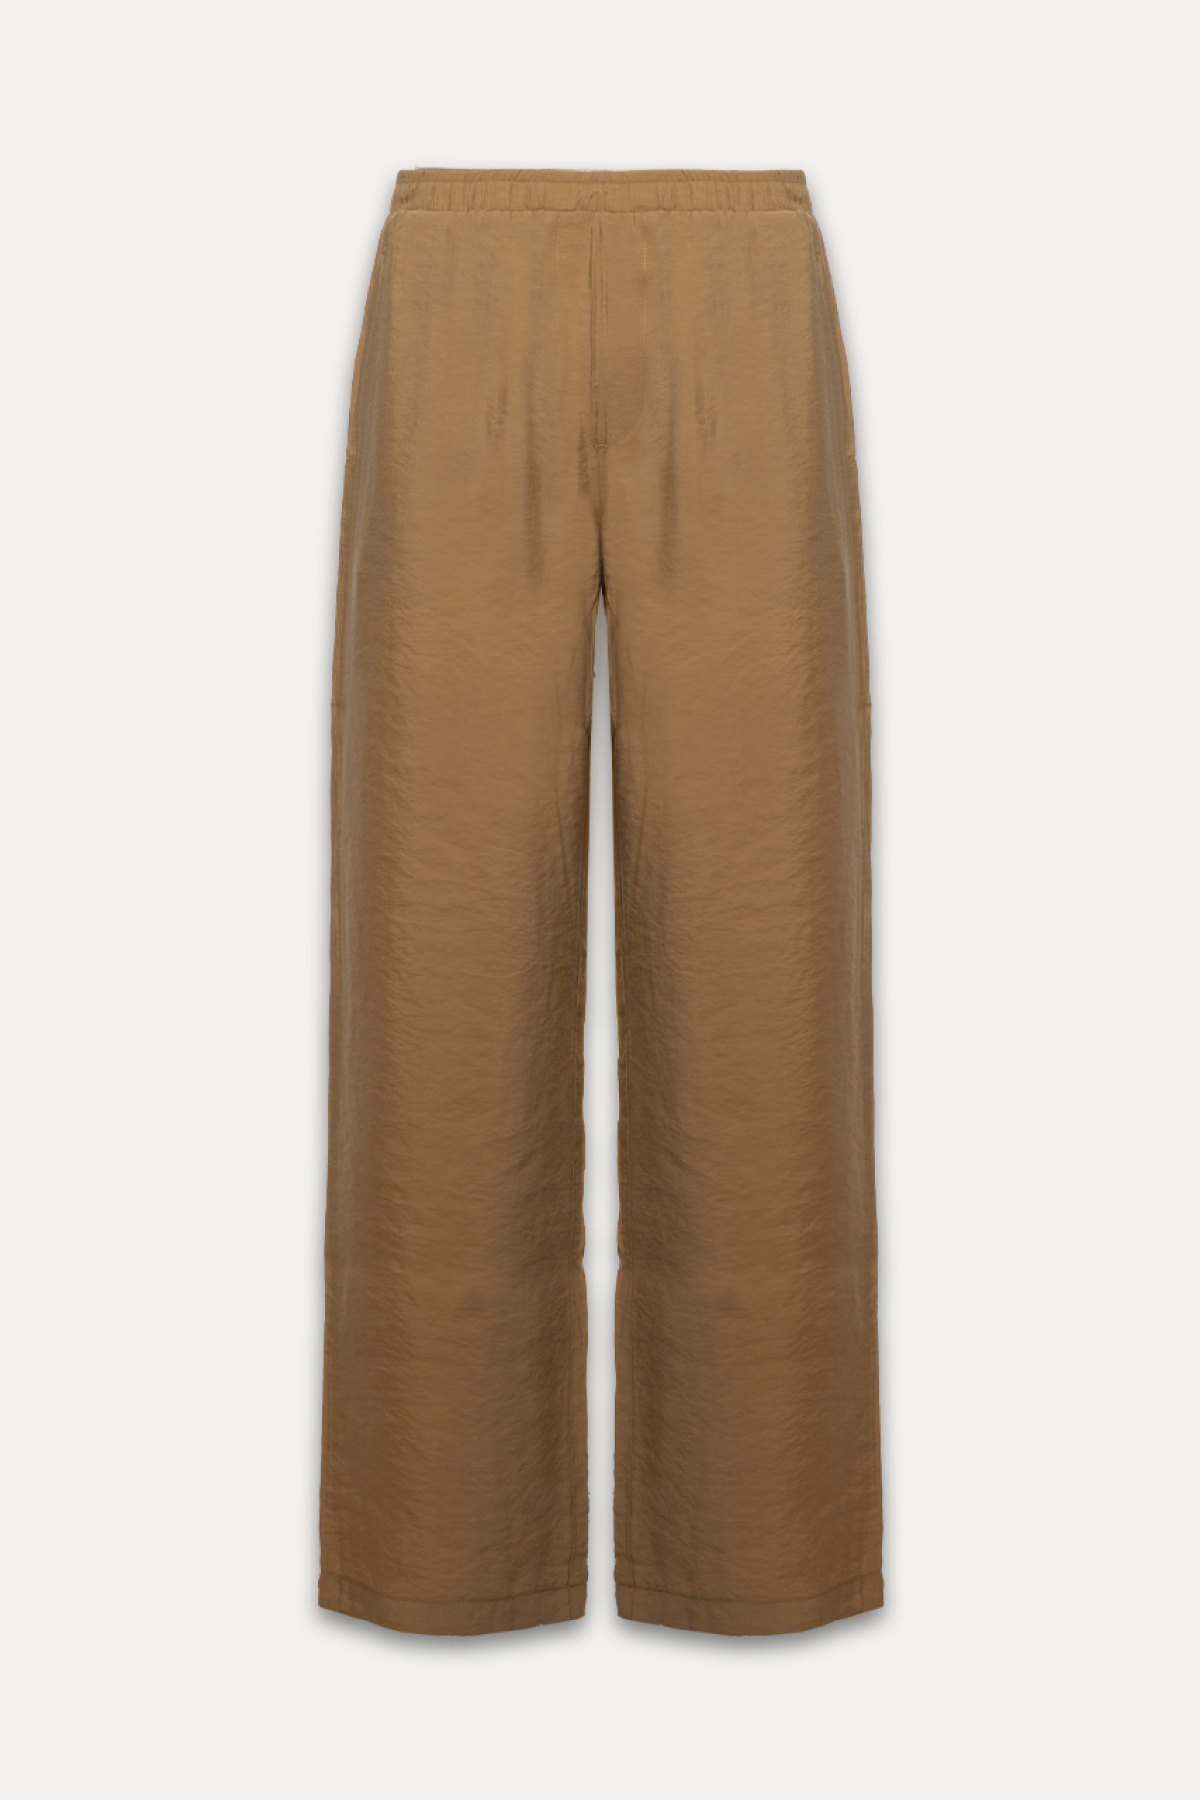 Family First Soft Pants - Beige